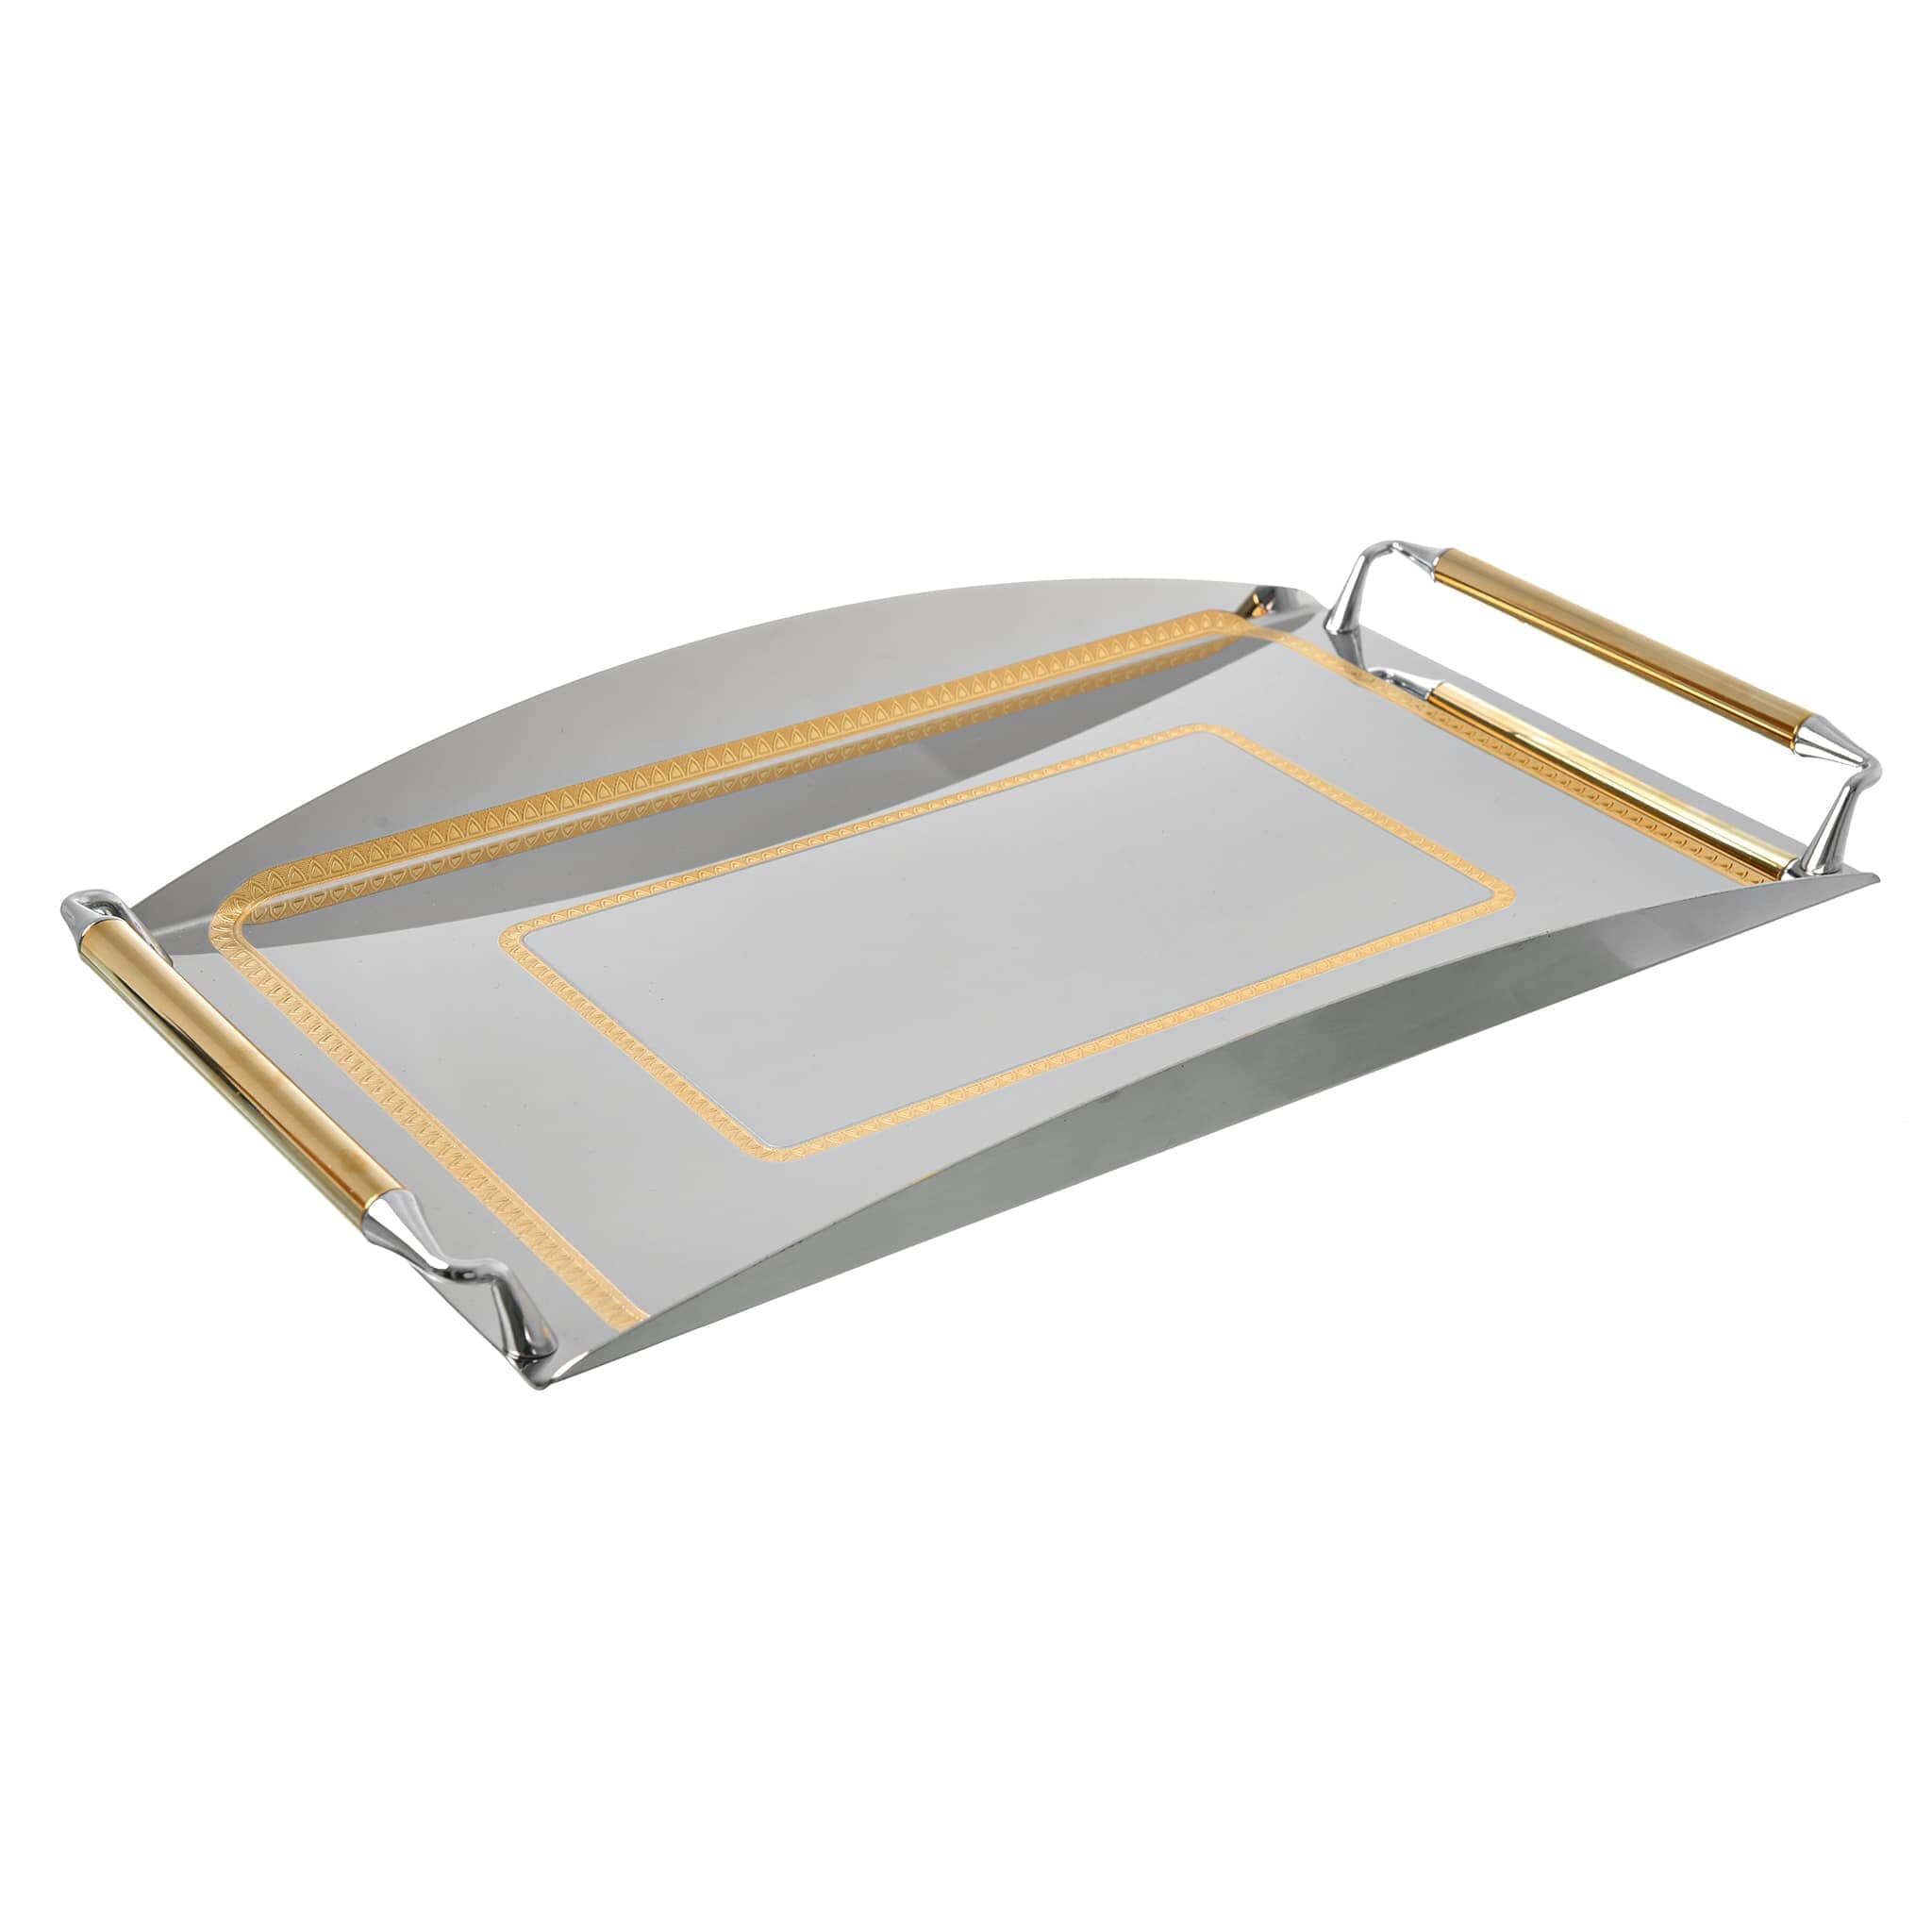 Elegant Gioiel - Rectangular Tray with Handles - Gold - Stainless Steel 18/10 - 30x45cm - 75000480